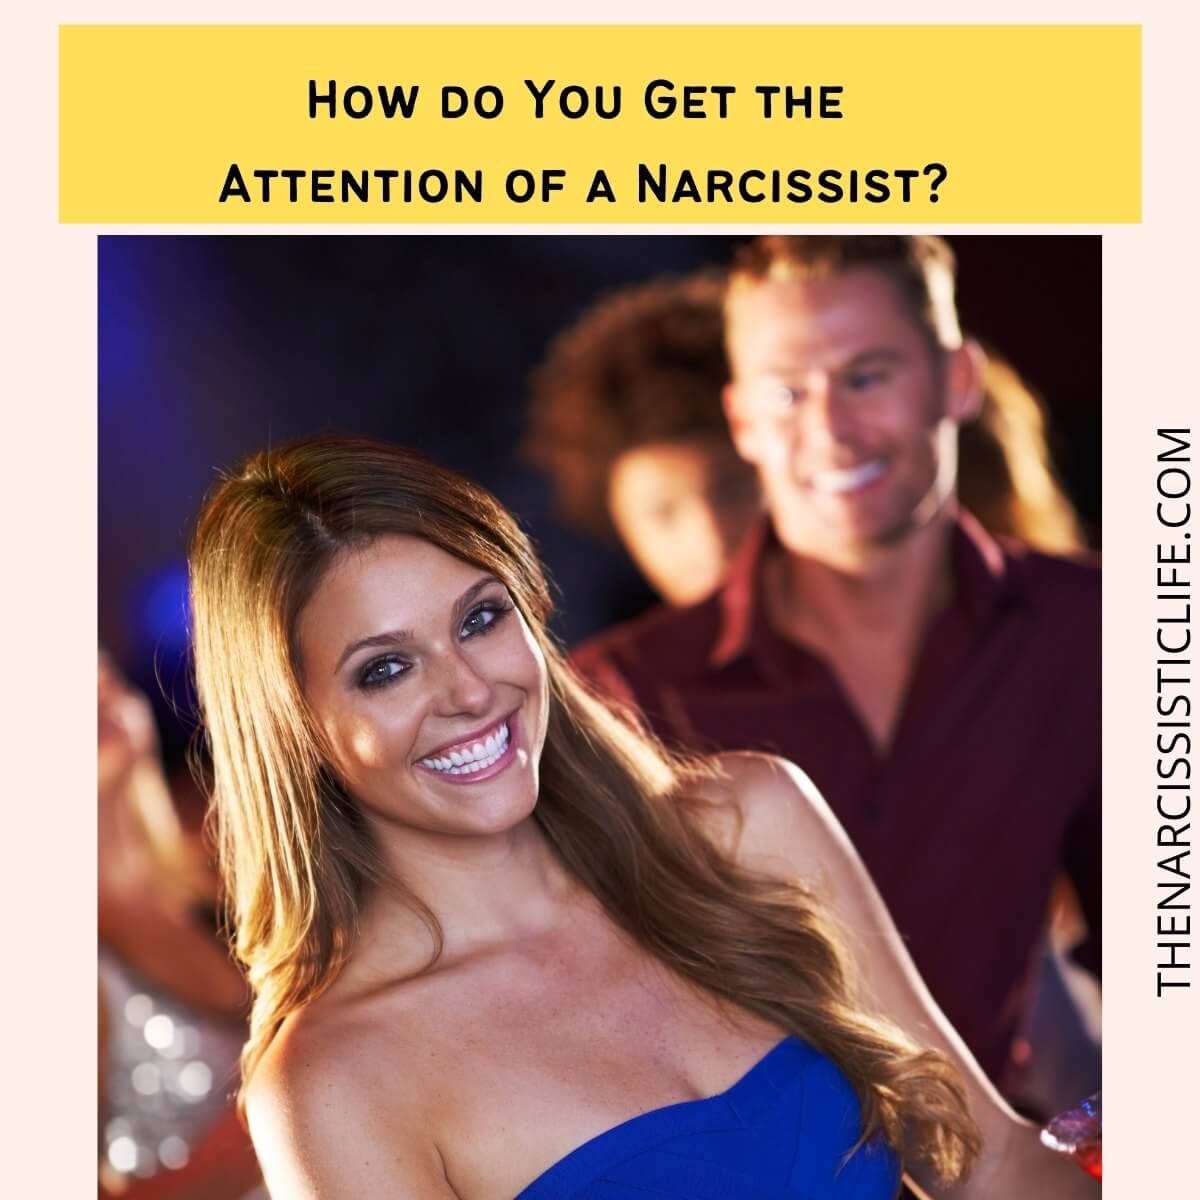 When a narcissist is obsessed with you